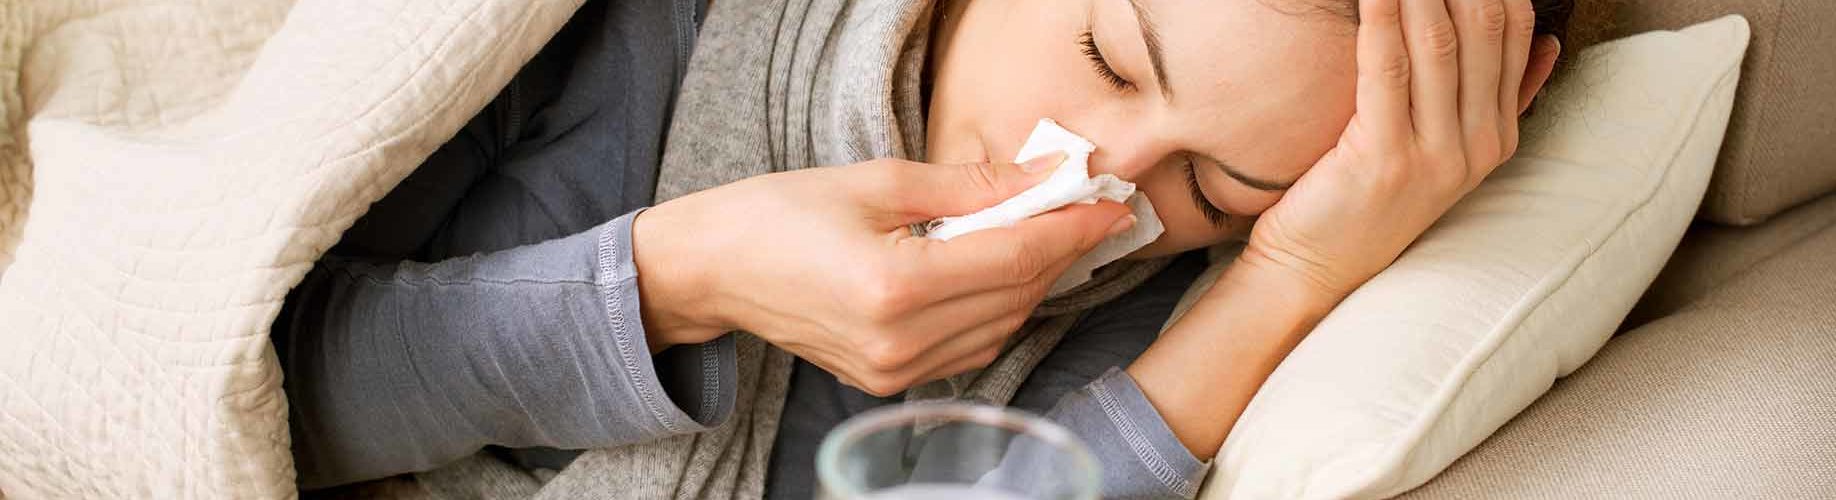 7 Home Remedies for the Flu